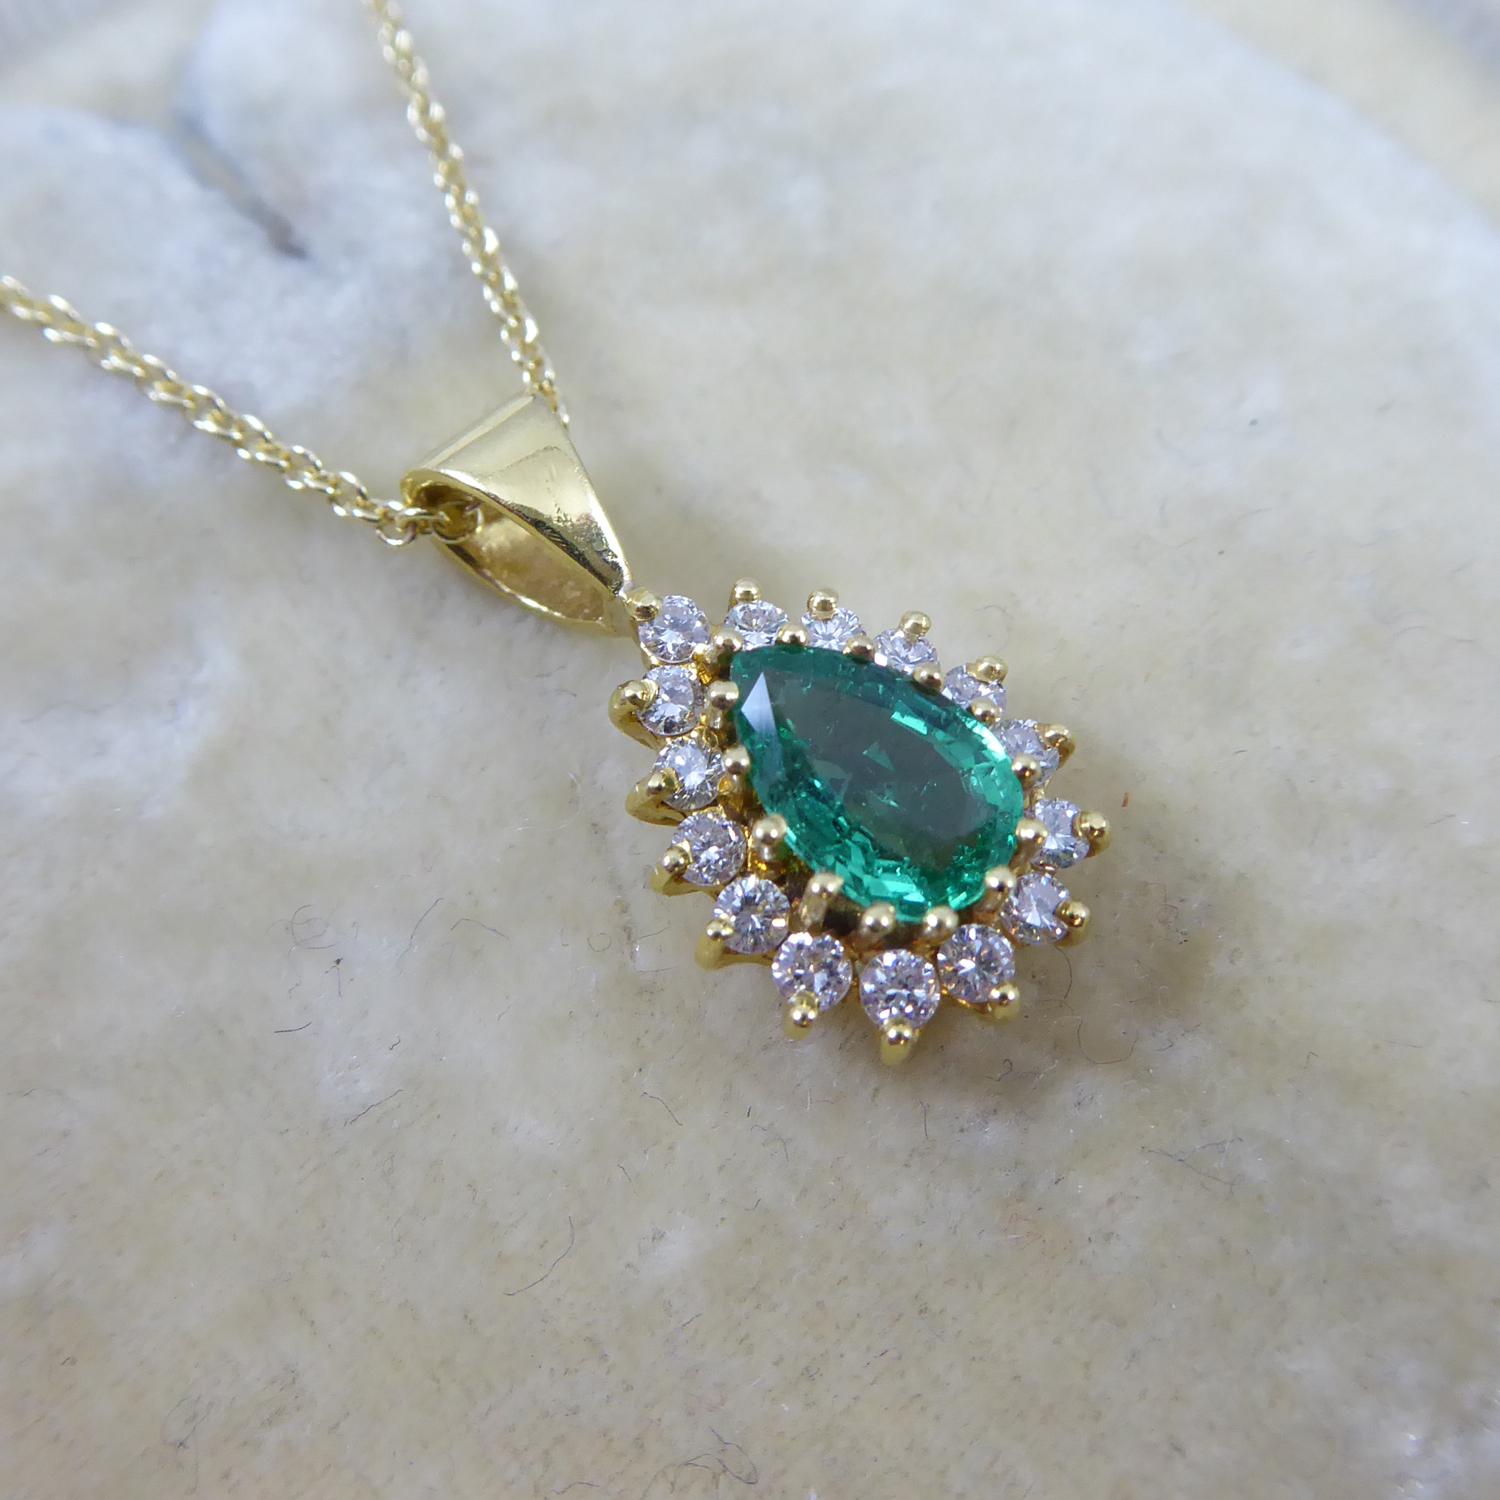 An emerald and diamond cluster pendant comprising a centrally set, pear-shaped, mixed-cut emerald of lightish green colour and strong saturation.  The emerald measures approx. 7.50mm x 5.10mm x 3.12mm.  A surround of 15 round, brilliant-cut